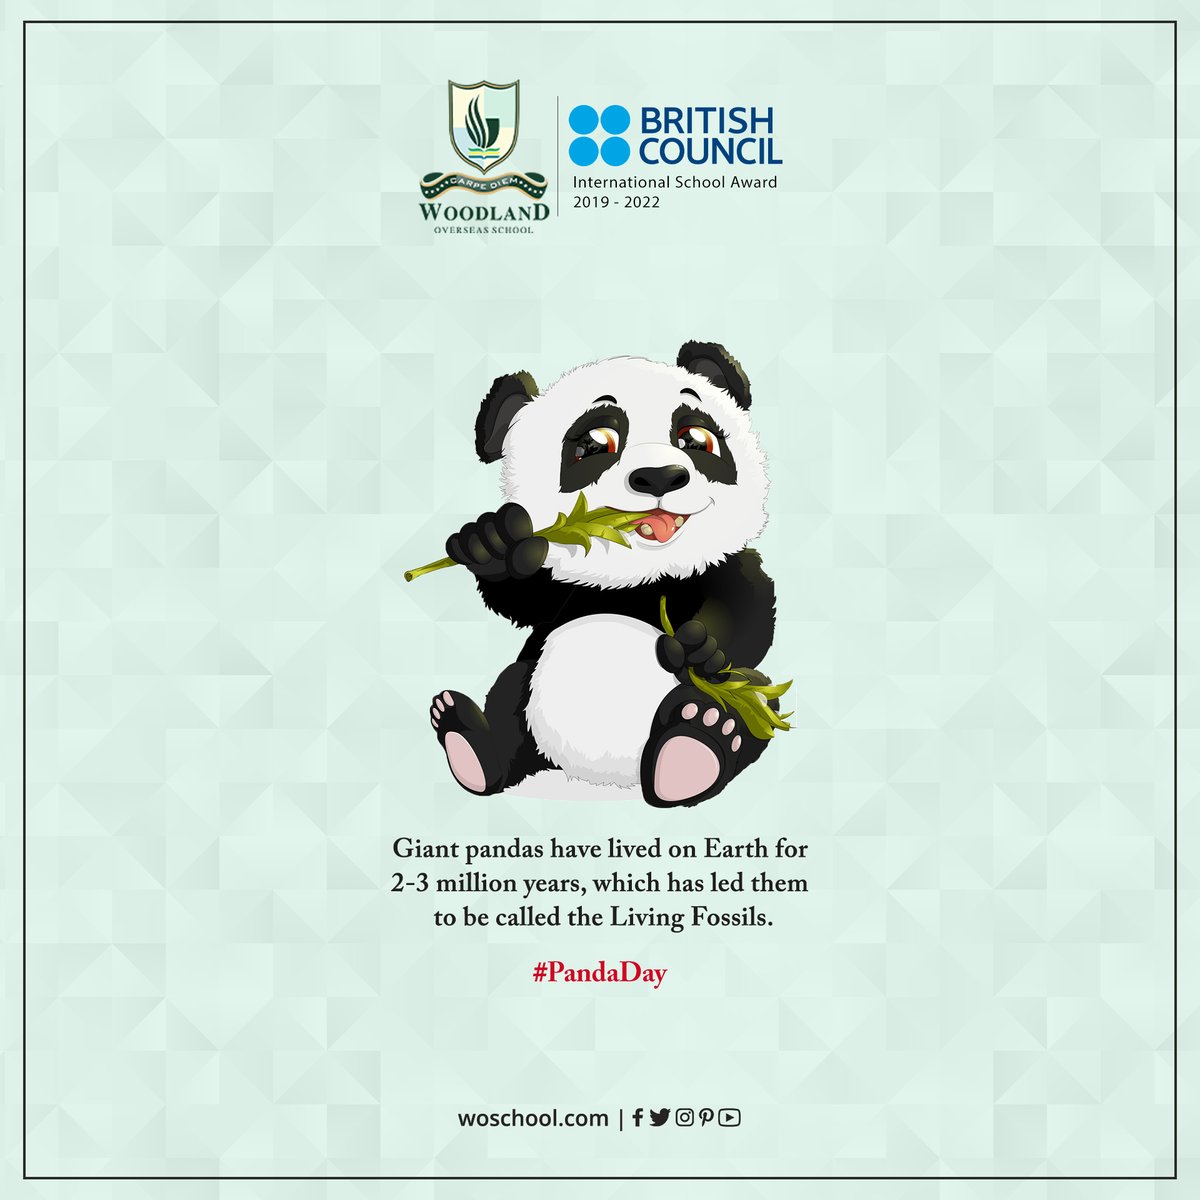 The giant panda's earliest known ancestor, Ailuropoda microta, was quite similar in anatomy to the present-day panda. All that has changed over the last 2-3 million years is that the giant panda has grown in size. 🐼

#PandaDay

#WoodlandOverseasSchool #CBSESchoolHoshiarpur